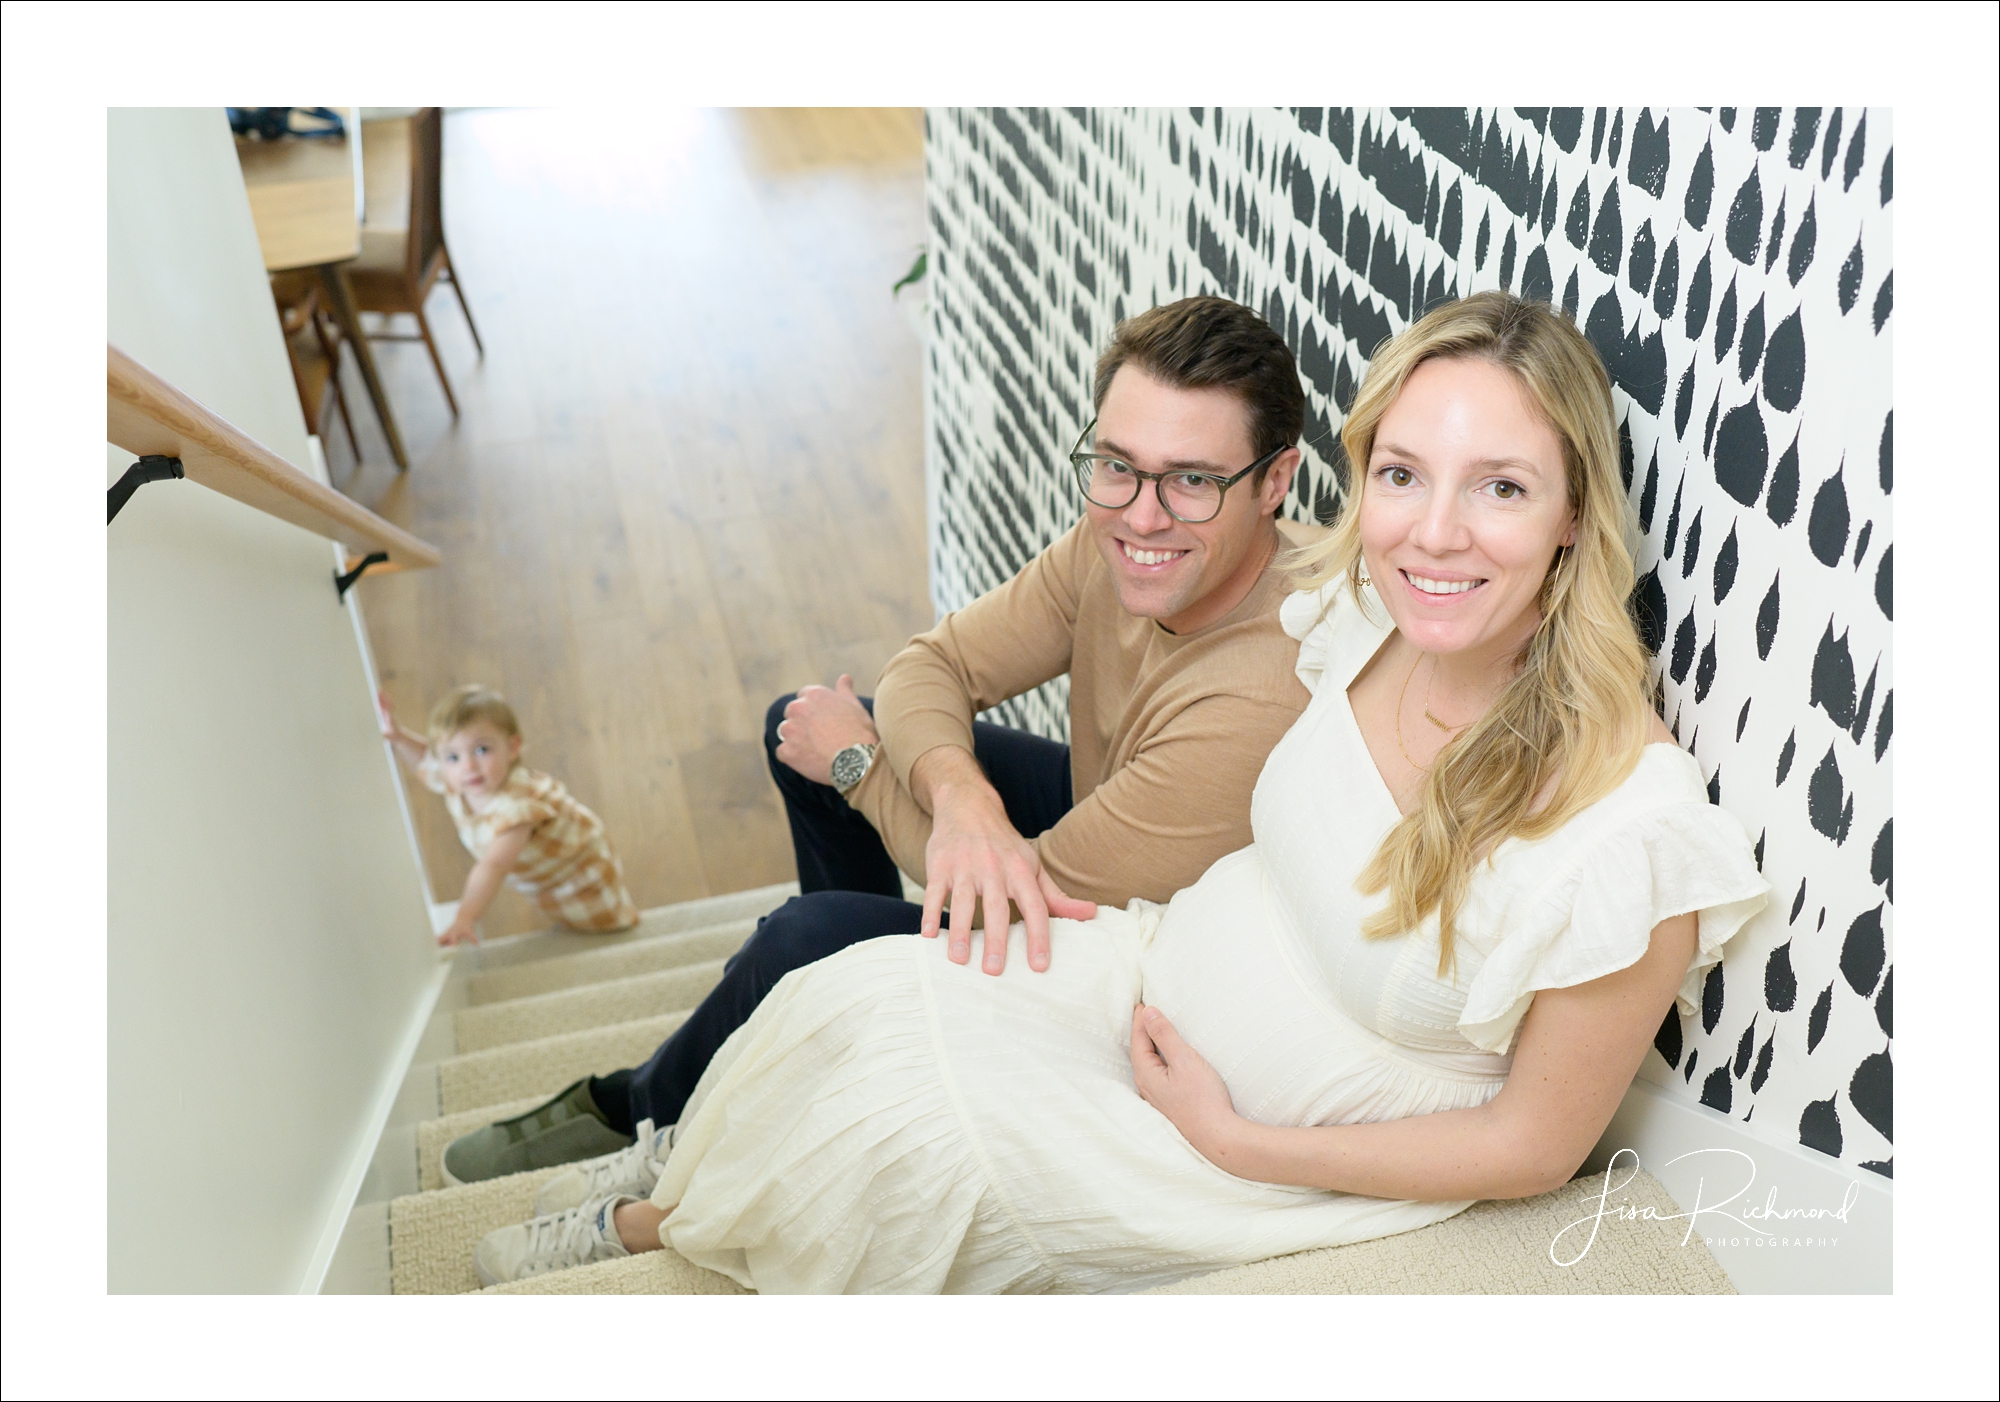 Gadaleta Family- a new home and and new baby on the way&#8230;